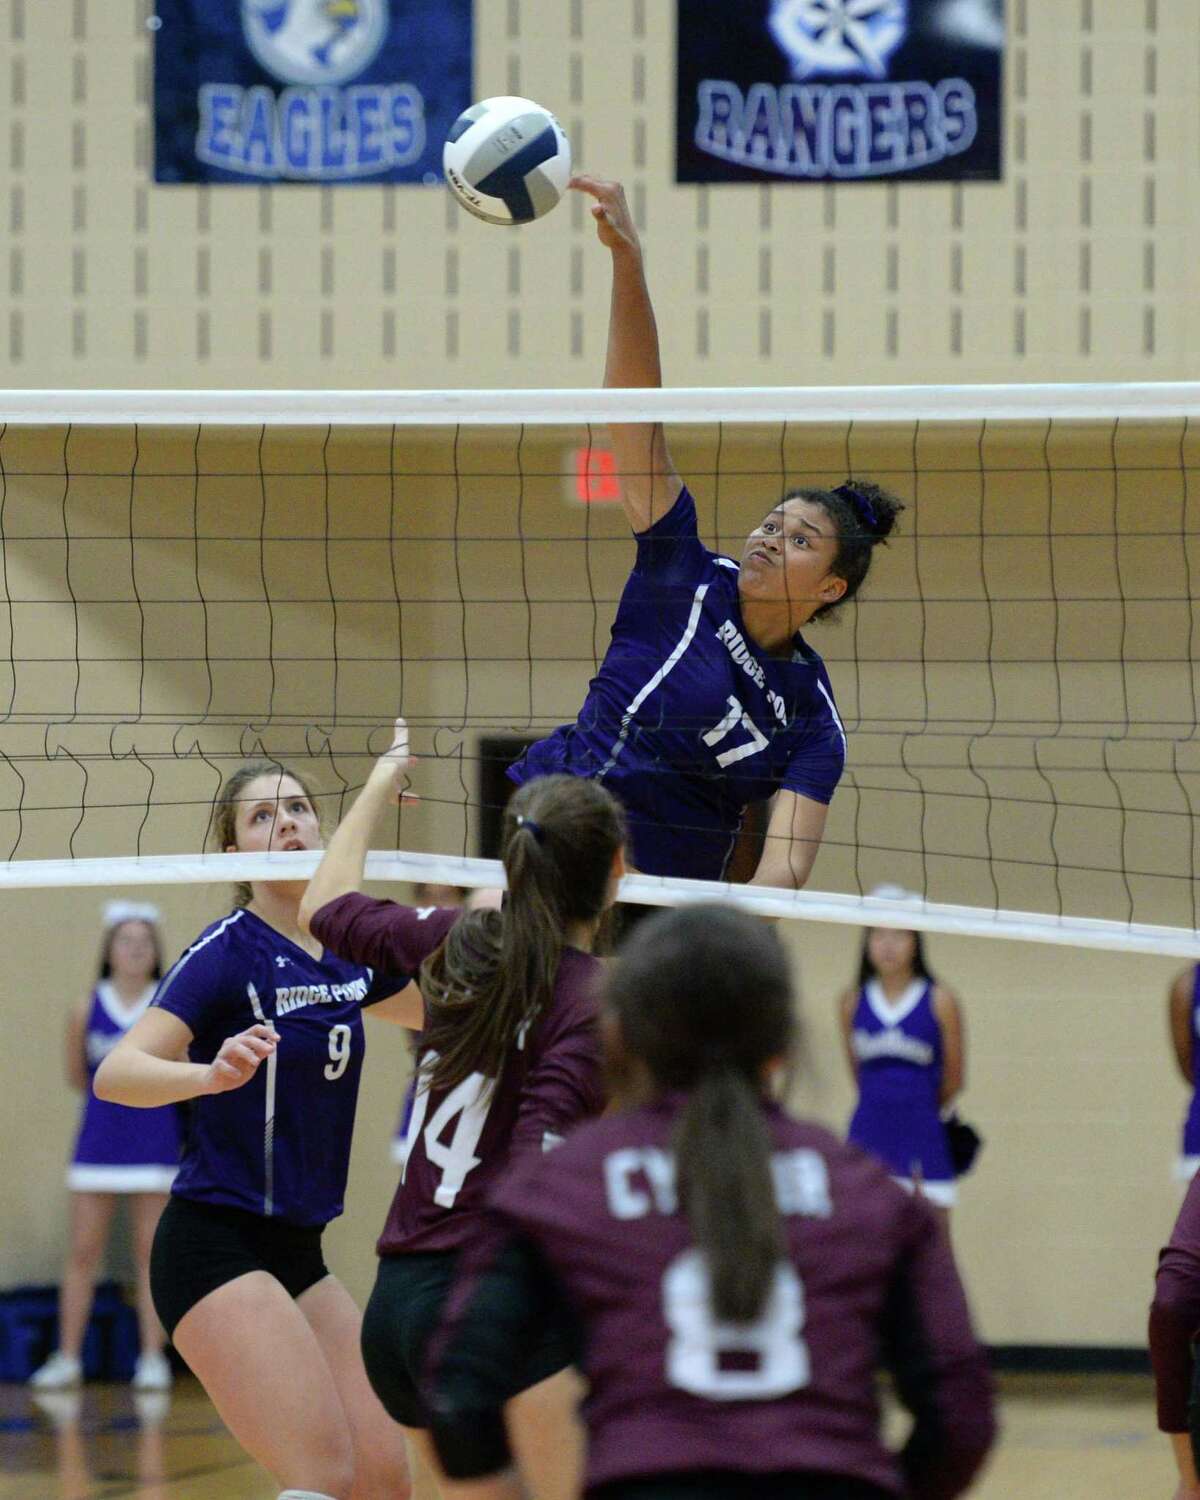 Alexis Roberson (17) of Ridge Point attempts a kill shot during the second set of the Region III-6A Final volleyball match between the Ridge Point Panthers and the Cy-Fair Bobcats on Saturday, November 16, 2019 at Wheeler Fieldhouse, Sugar Land, TX.